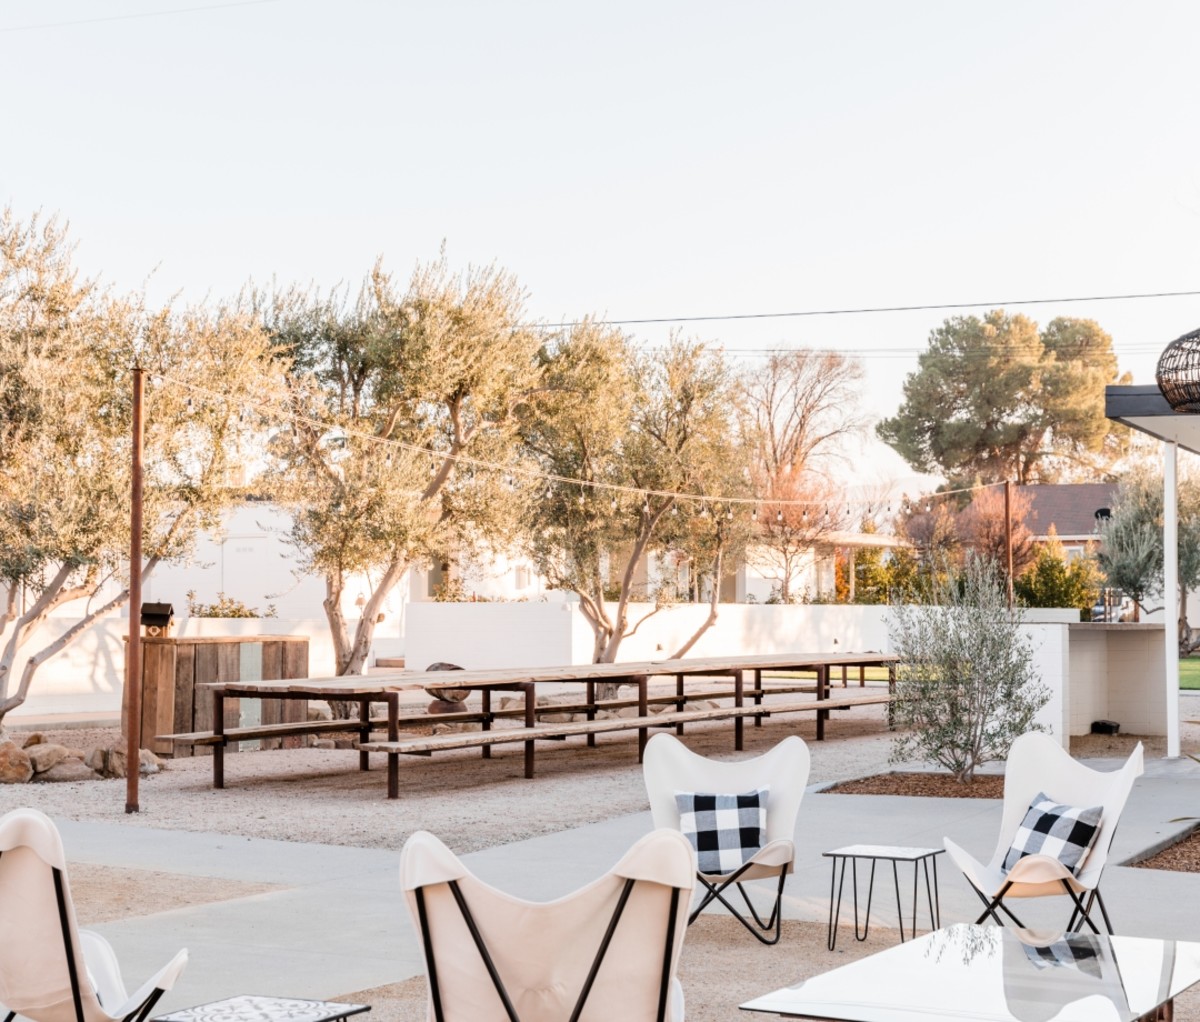 The patio and white chairs at the Cuyama Buckhorn hotel